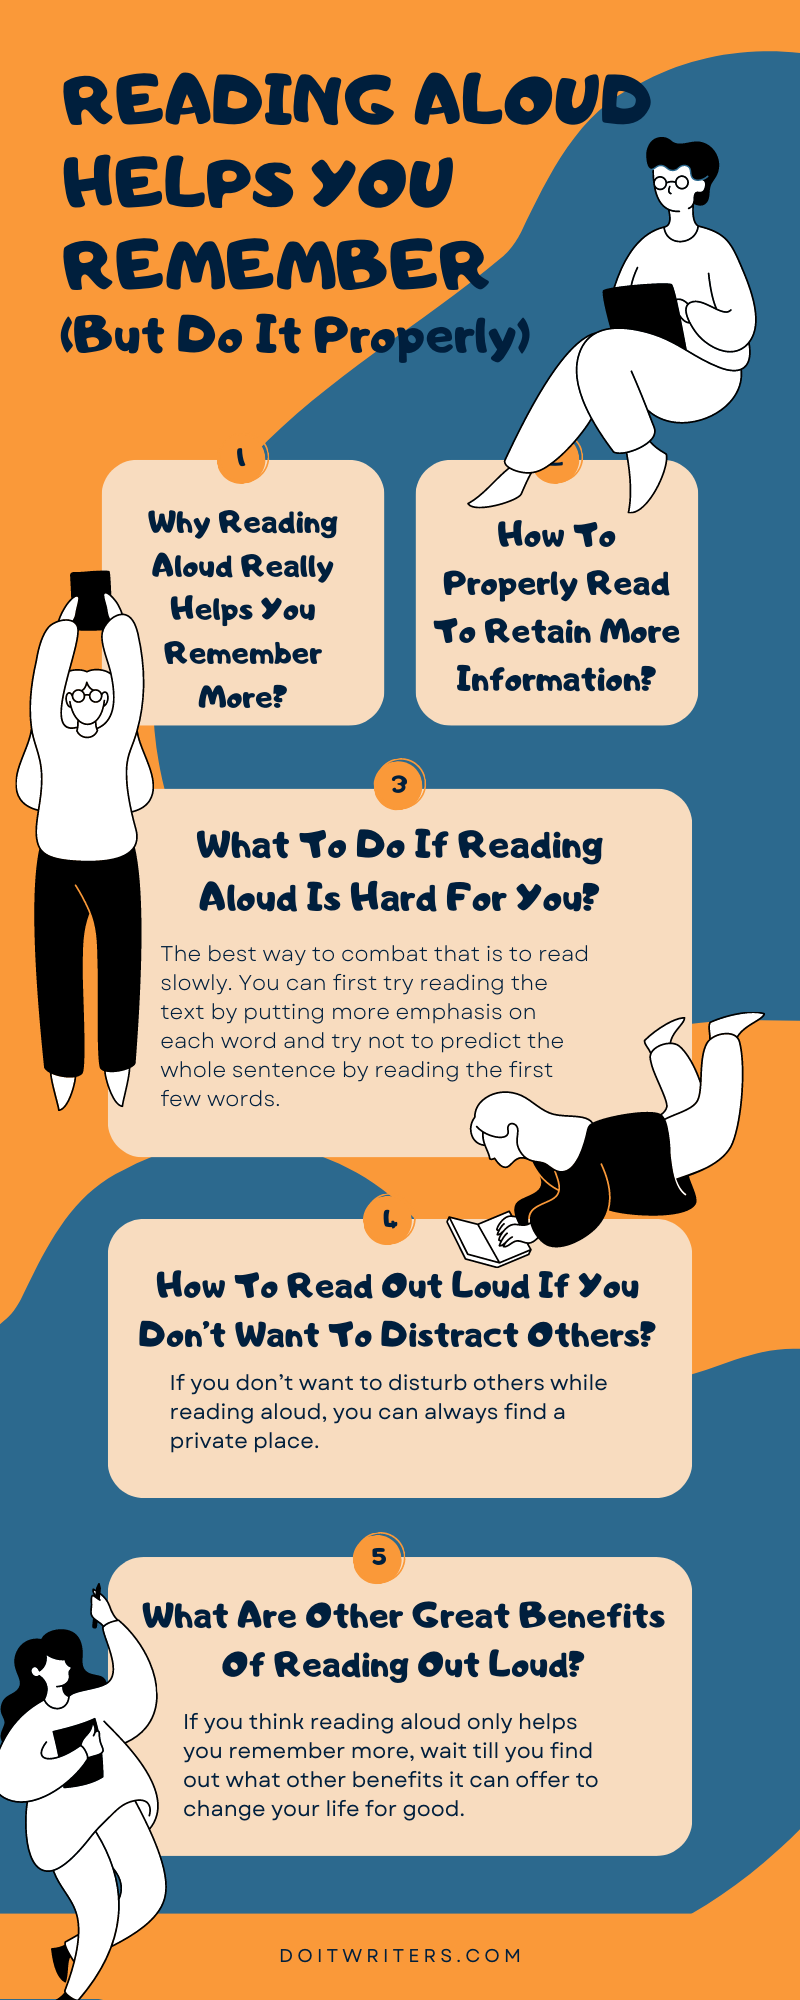 Reading Aloud Helps You Remember (But do it Properly)